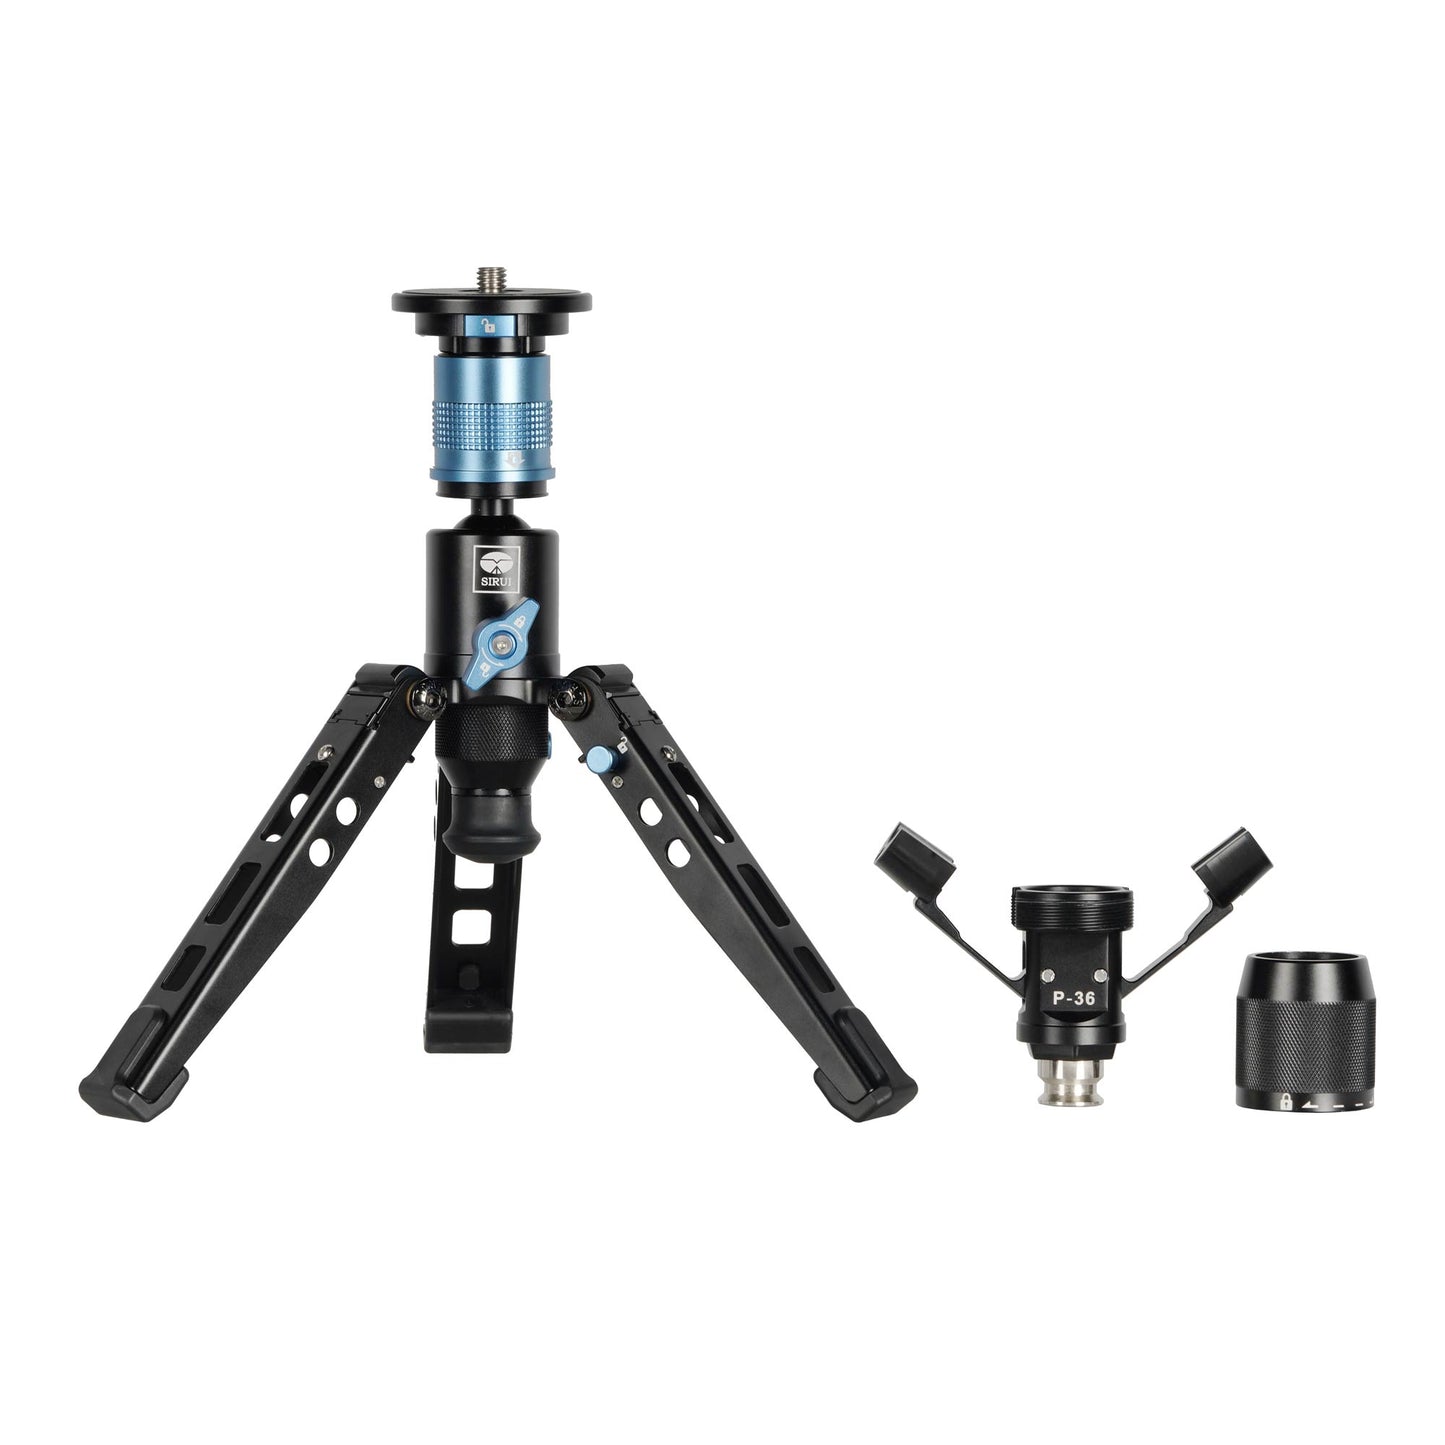 SIRUI P-36 Kit Standspinne + Adapter for P-306, P-326, AM-306, AM-326